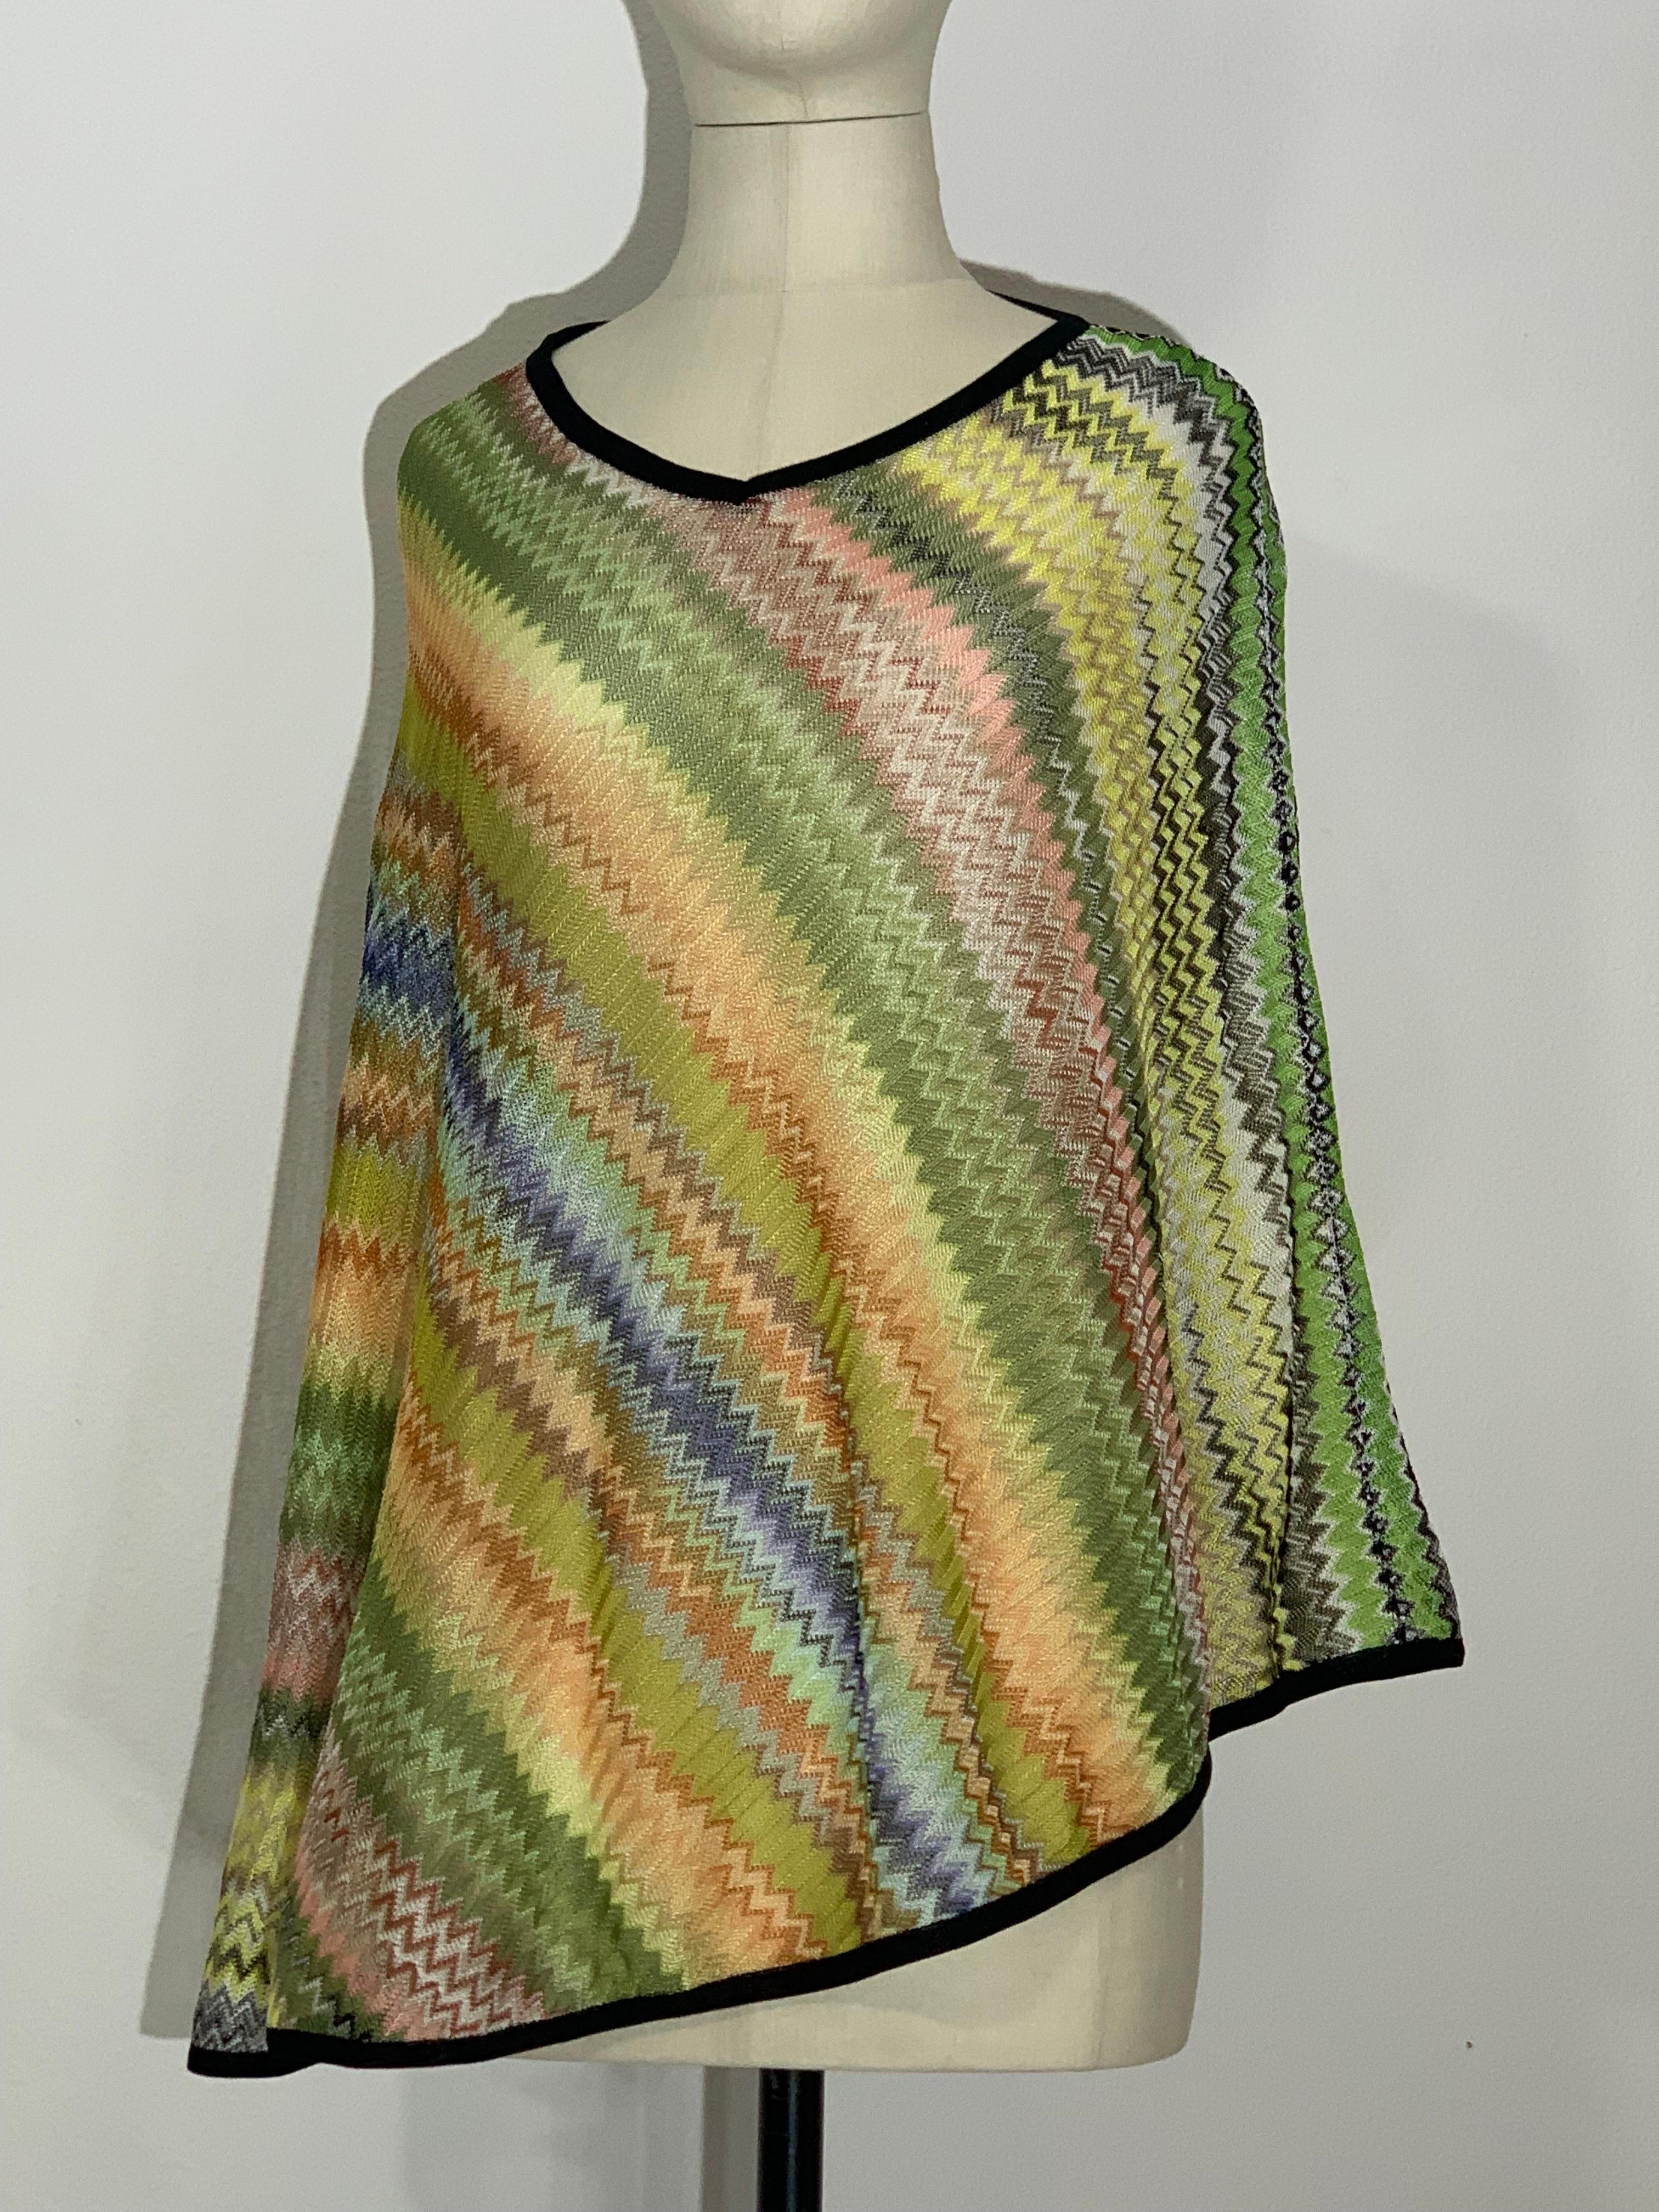 Women's Missoni Spring/Summer Rayon & Cotton Knit Cover-Up in Classic Missoni Zig-Zag For Sale